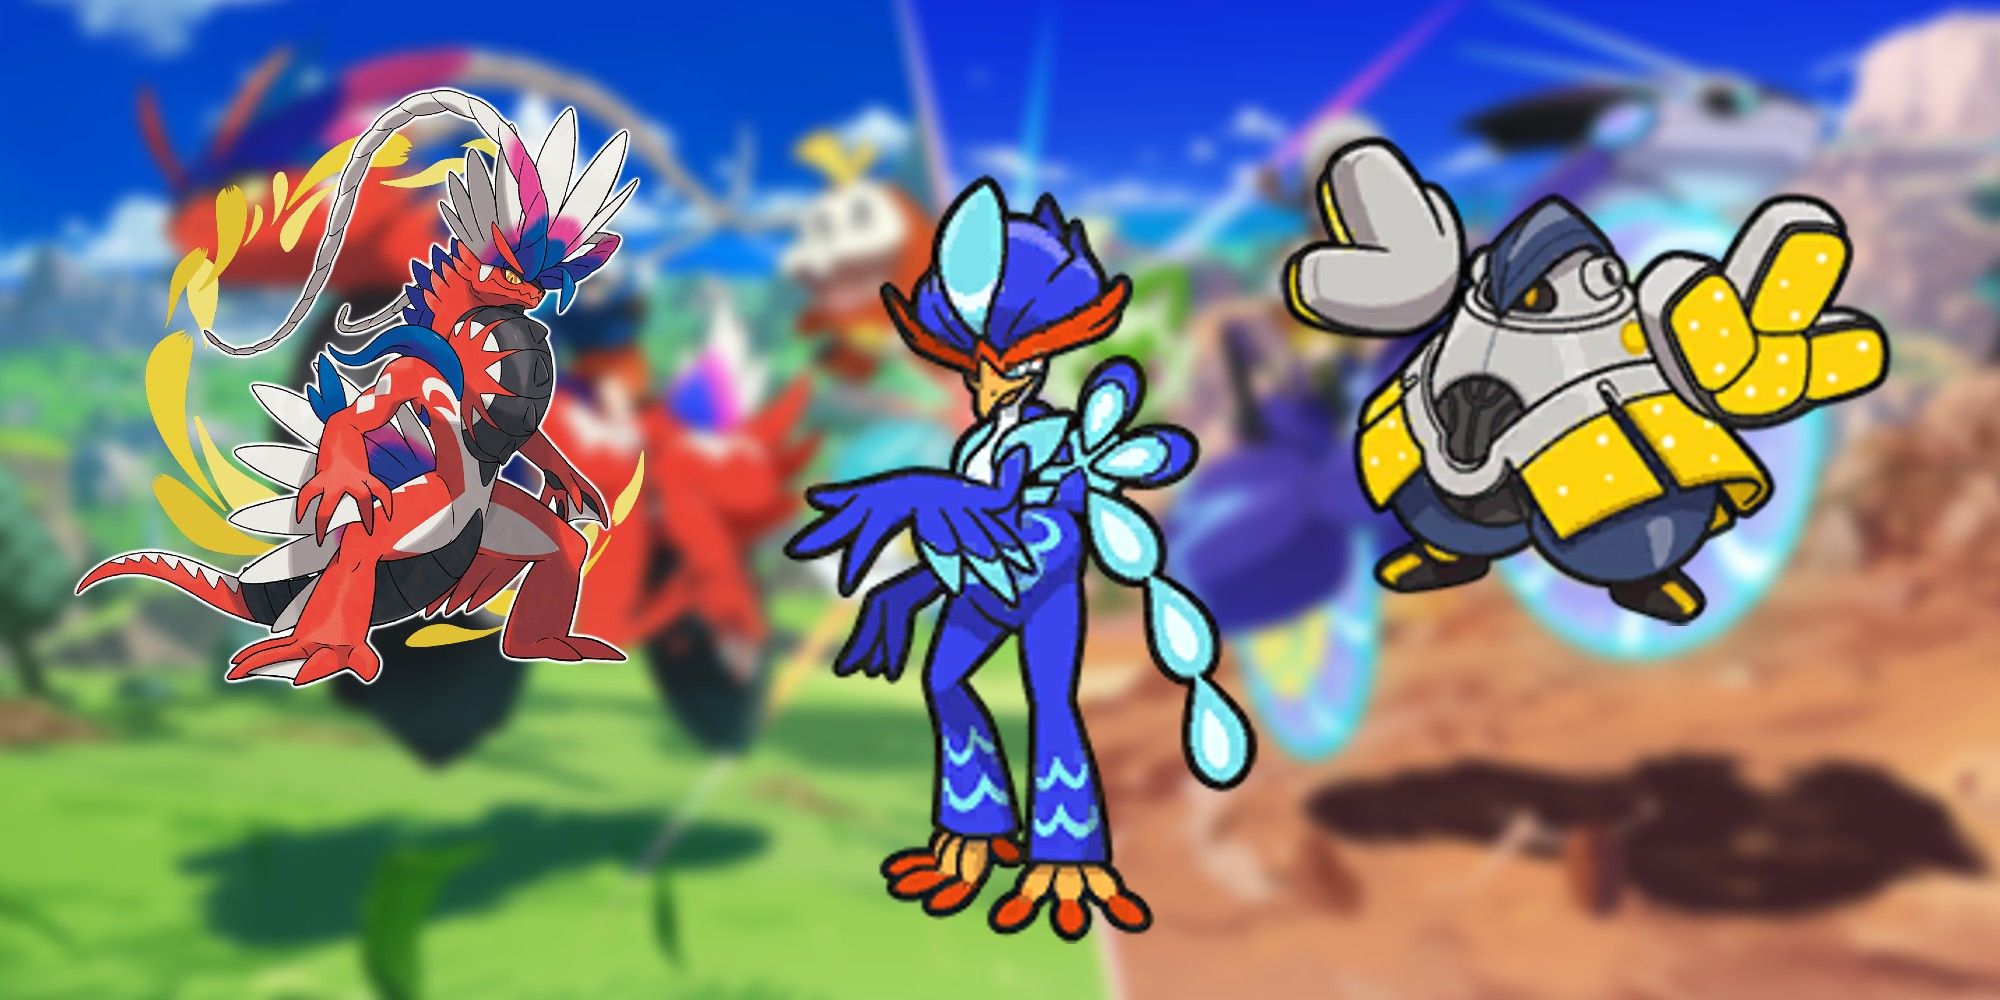 Pokemon Scarlet & Violet: Best Fighting Types In The Game